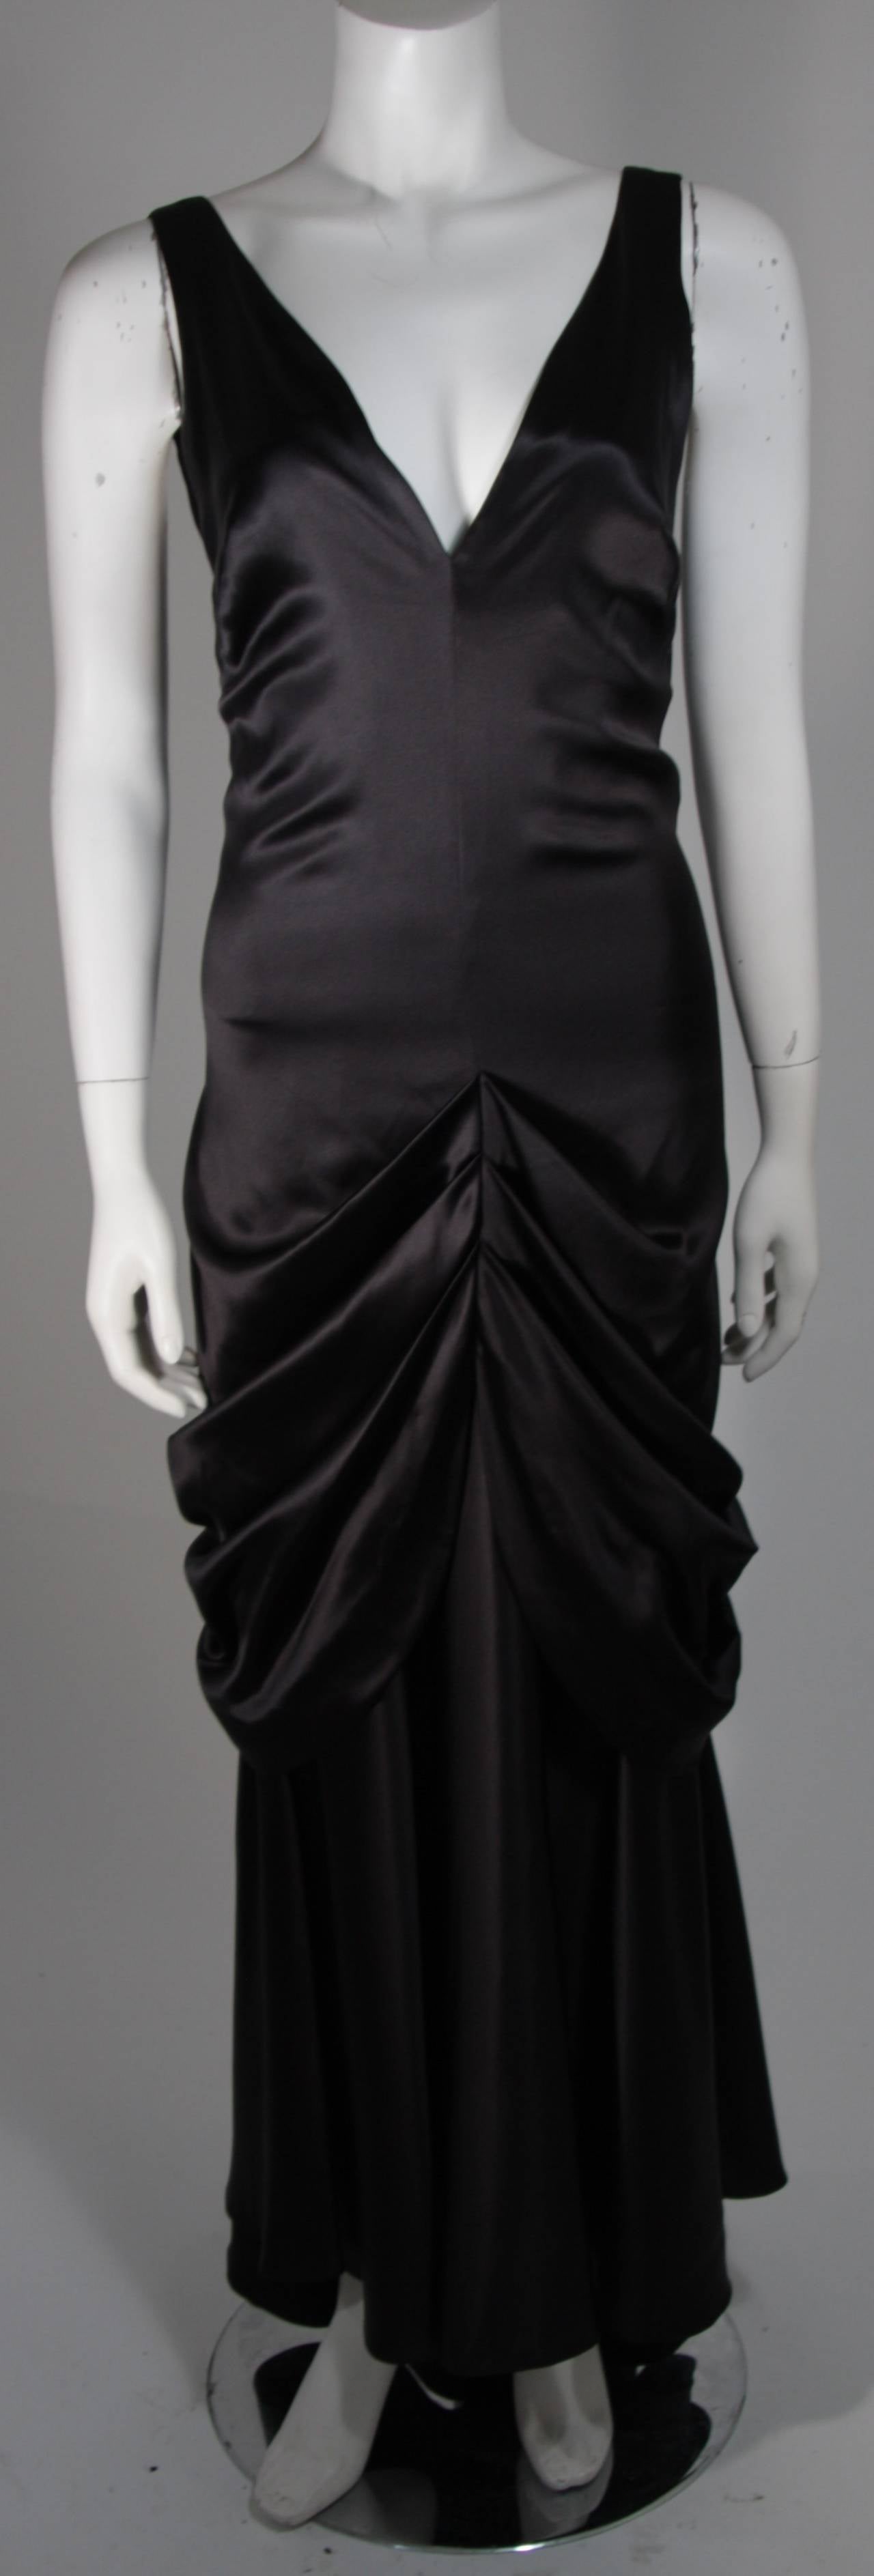 This Ralph Lauren gown is composed of black silk. There is a zipper closure. In excellent condition.

**Please cross-reference measurements for personal accuracy. 

Measures (Approximately)
Length: 56